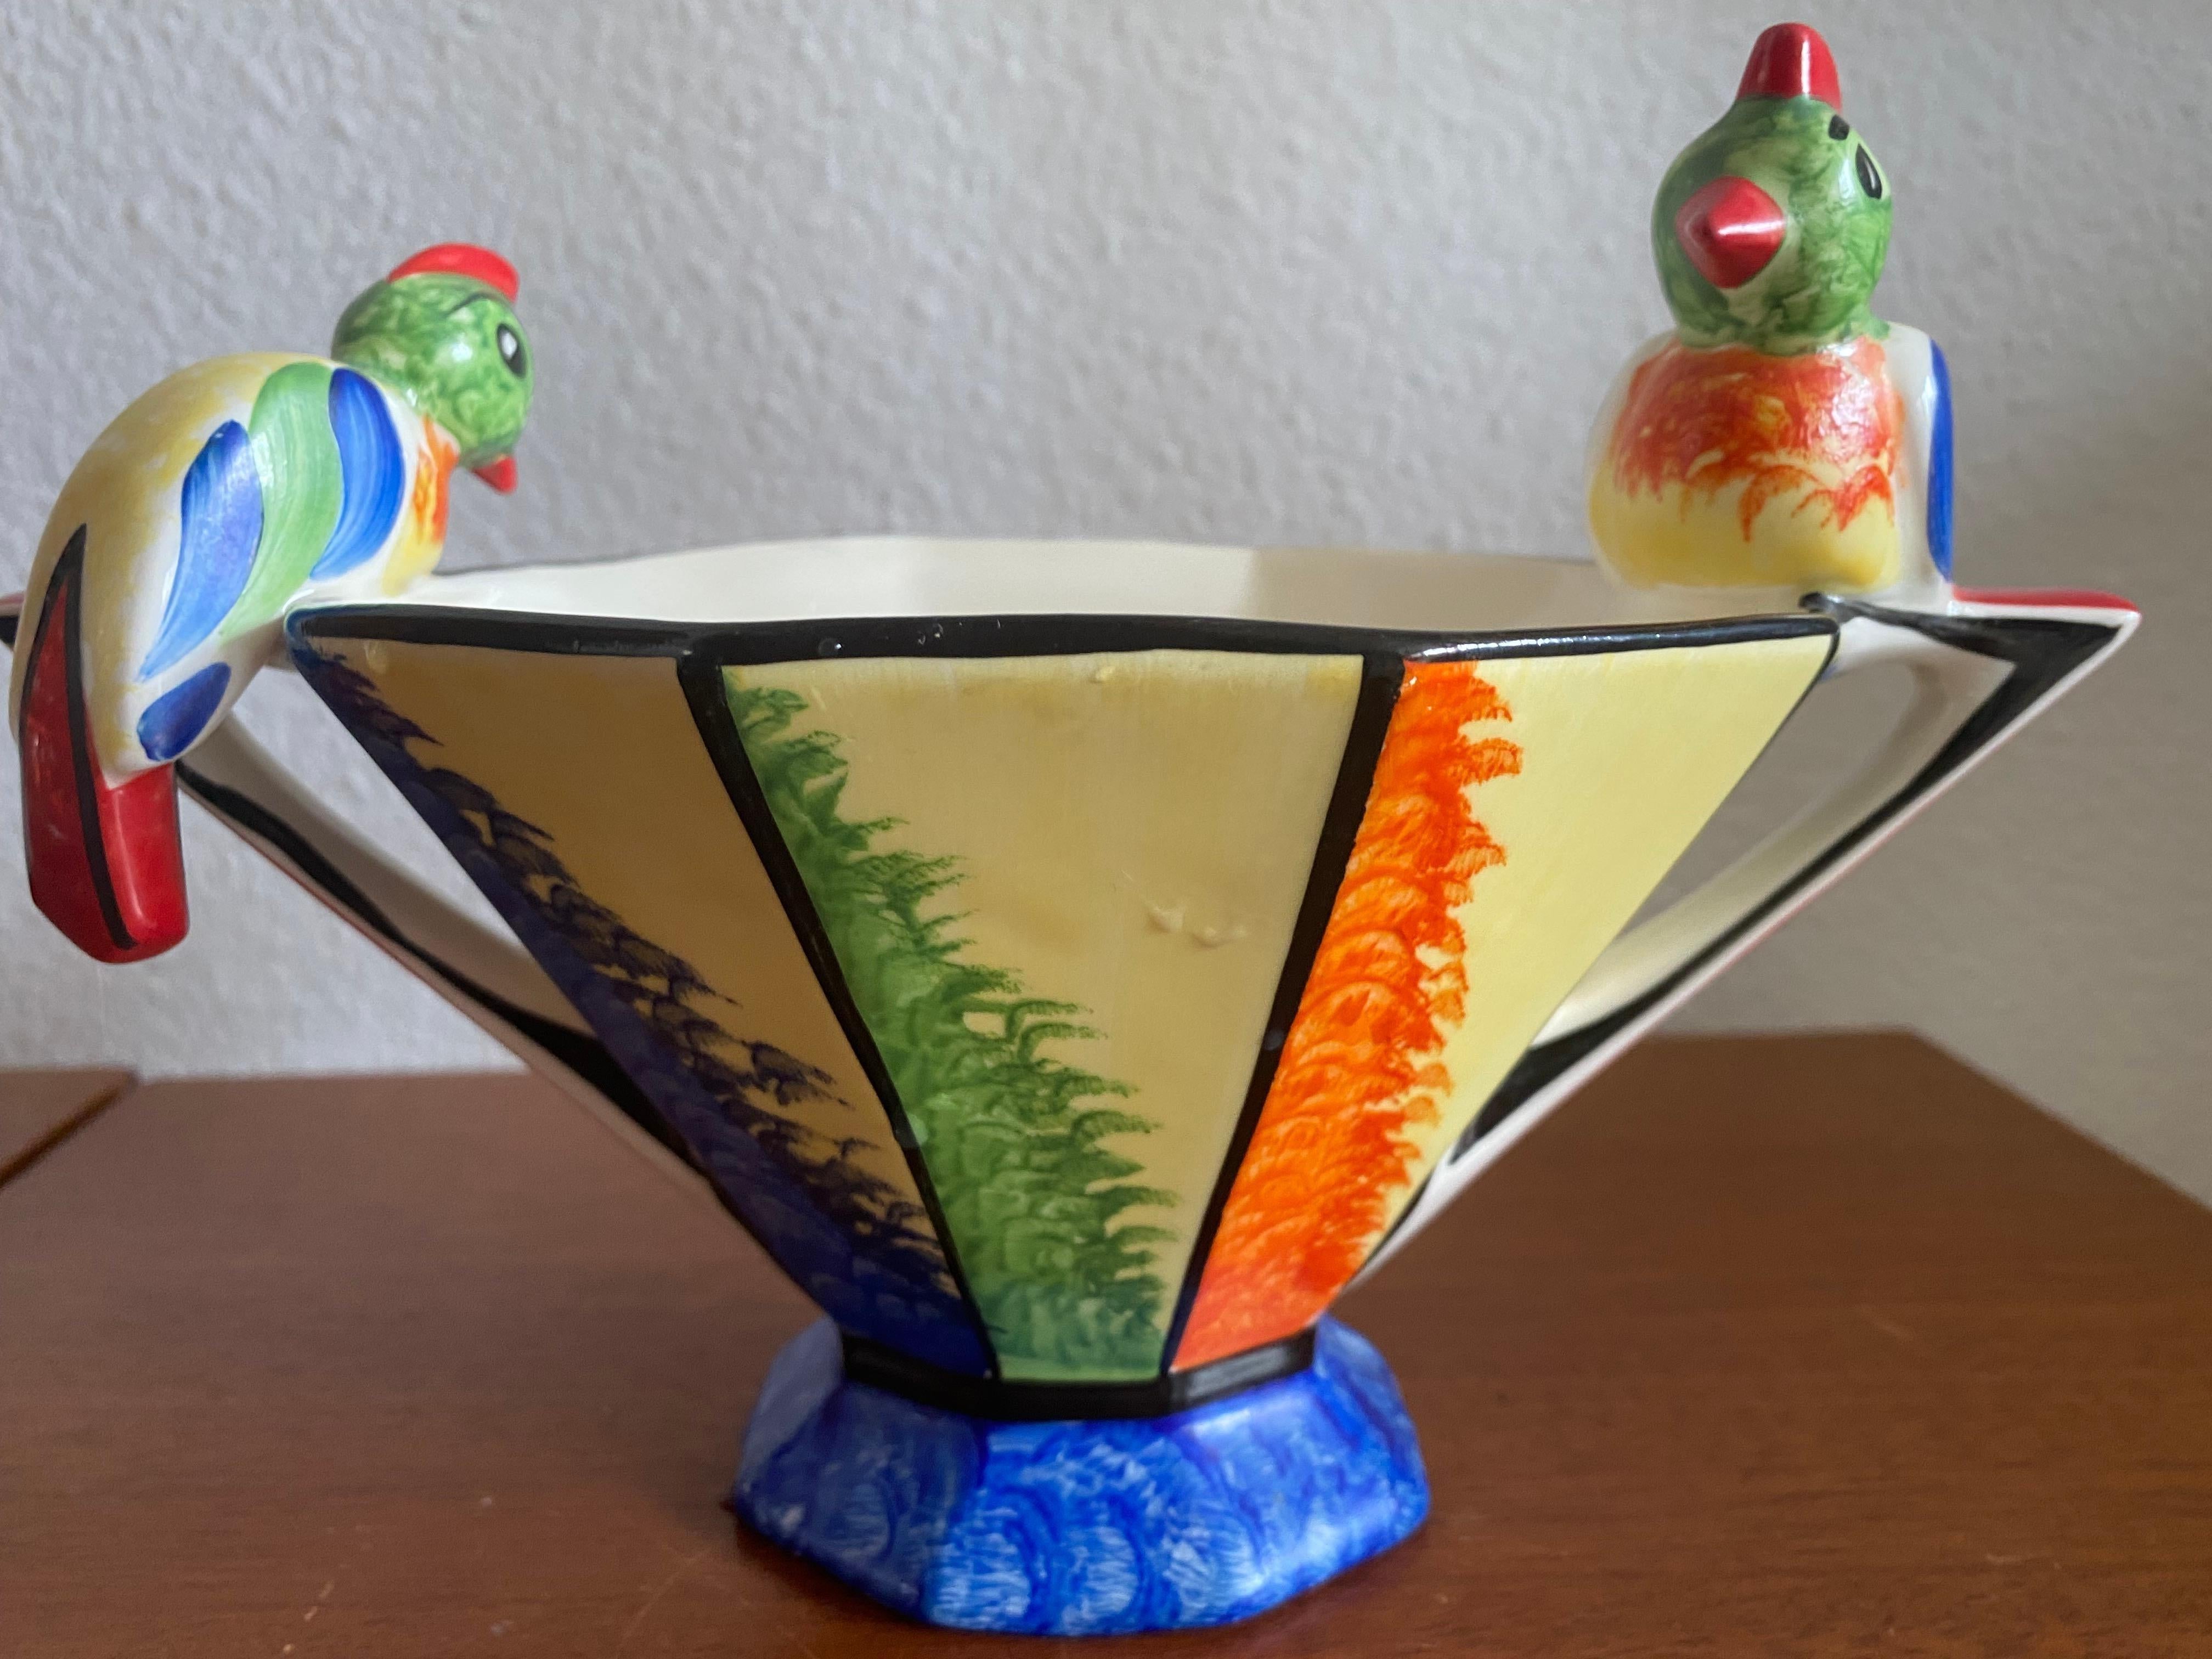 In a very good condition a beautiful Art Deco bowl, glazed in vibrant glazed colors. Hand painted by Ditmar Urbach. Origin: Czechoslovakia.
Unique piece and undamaged.